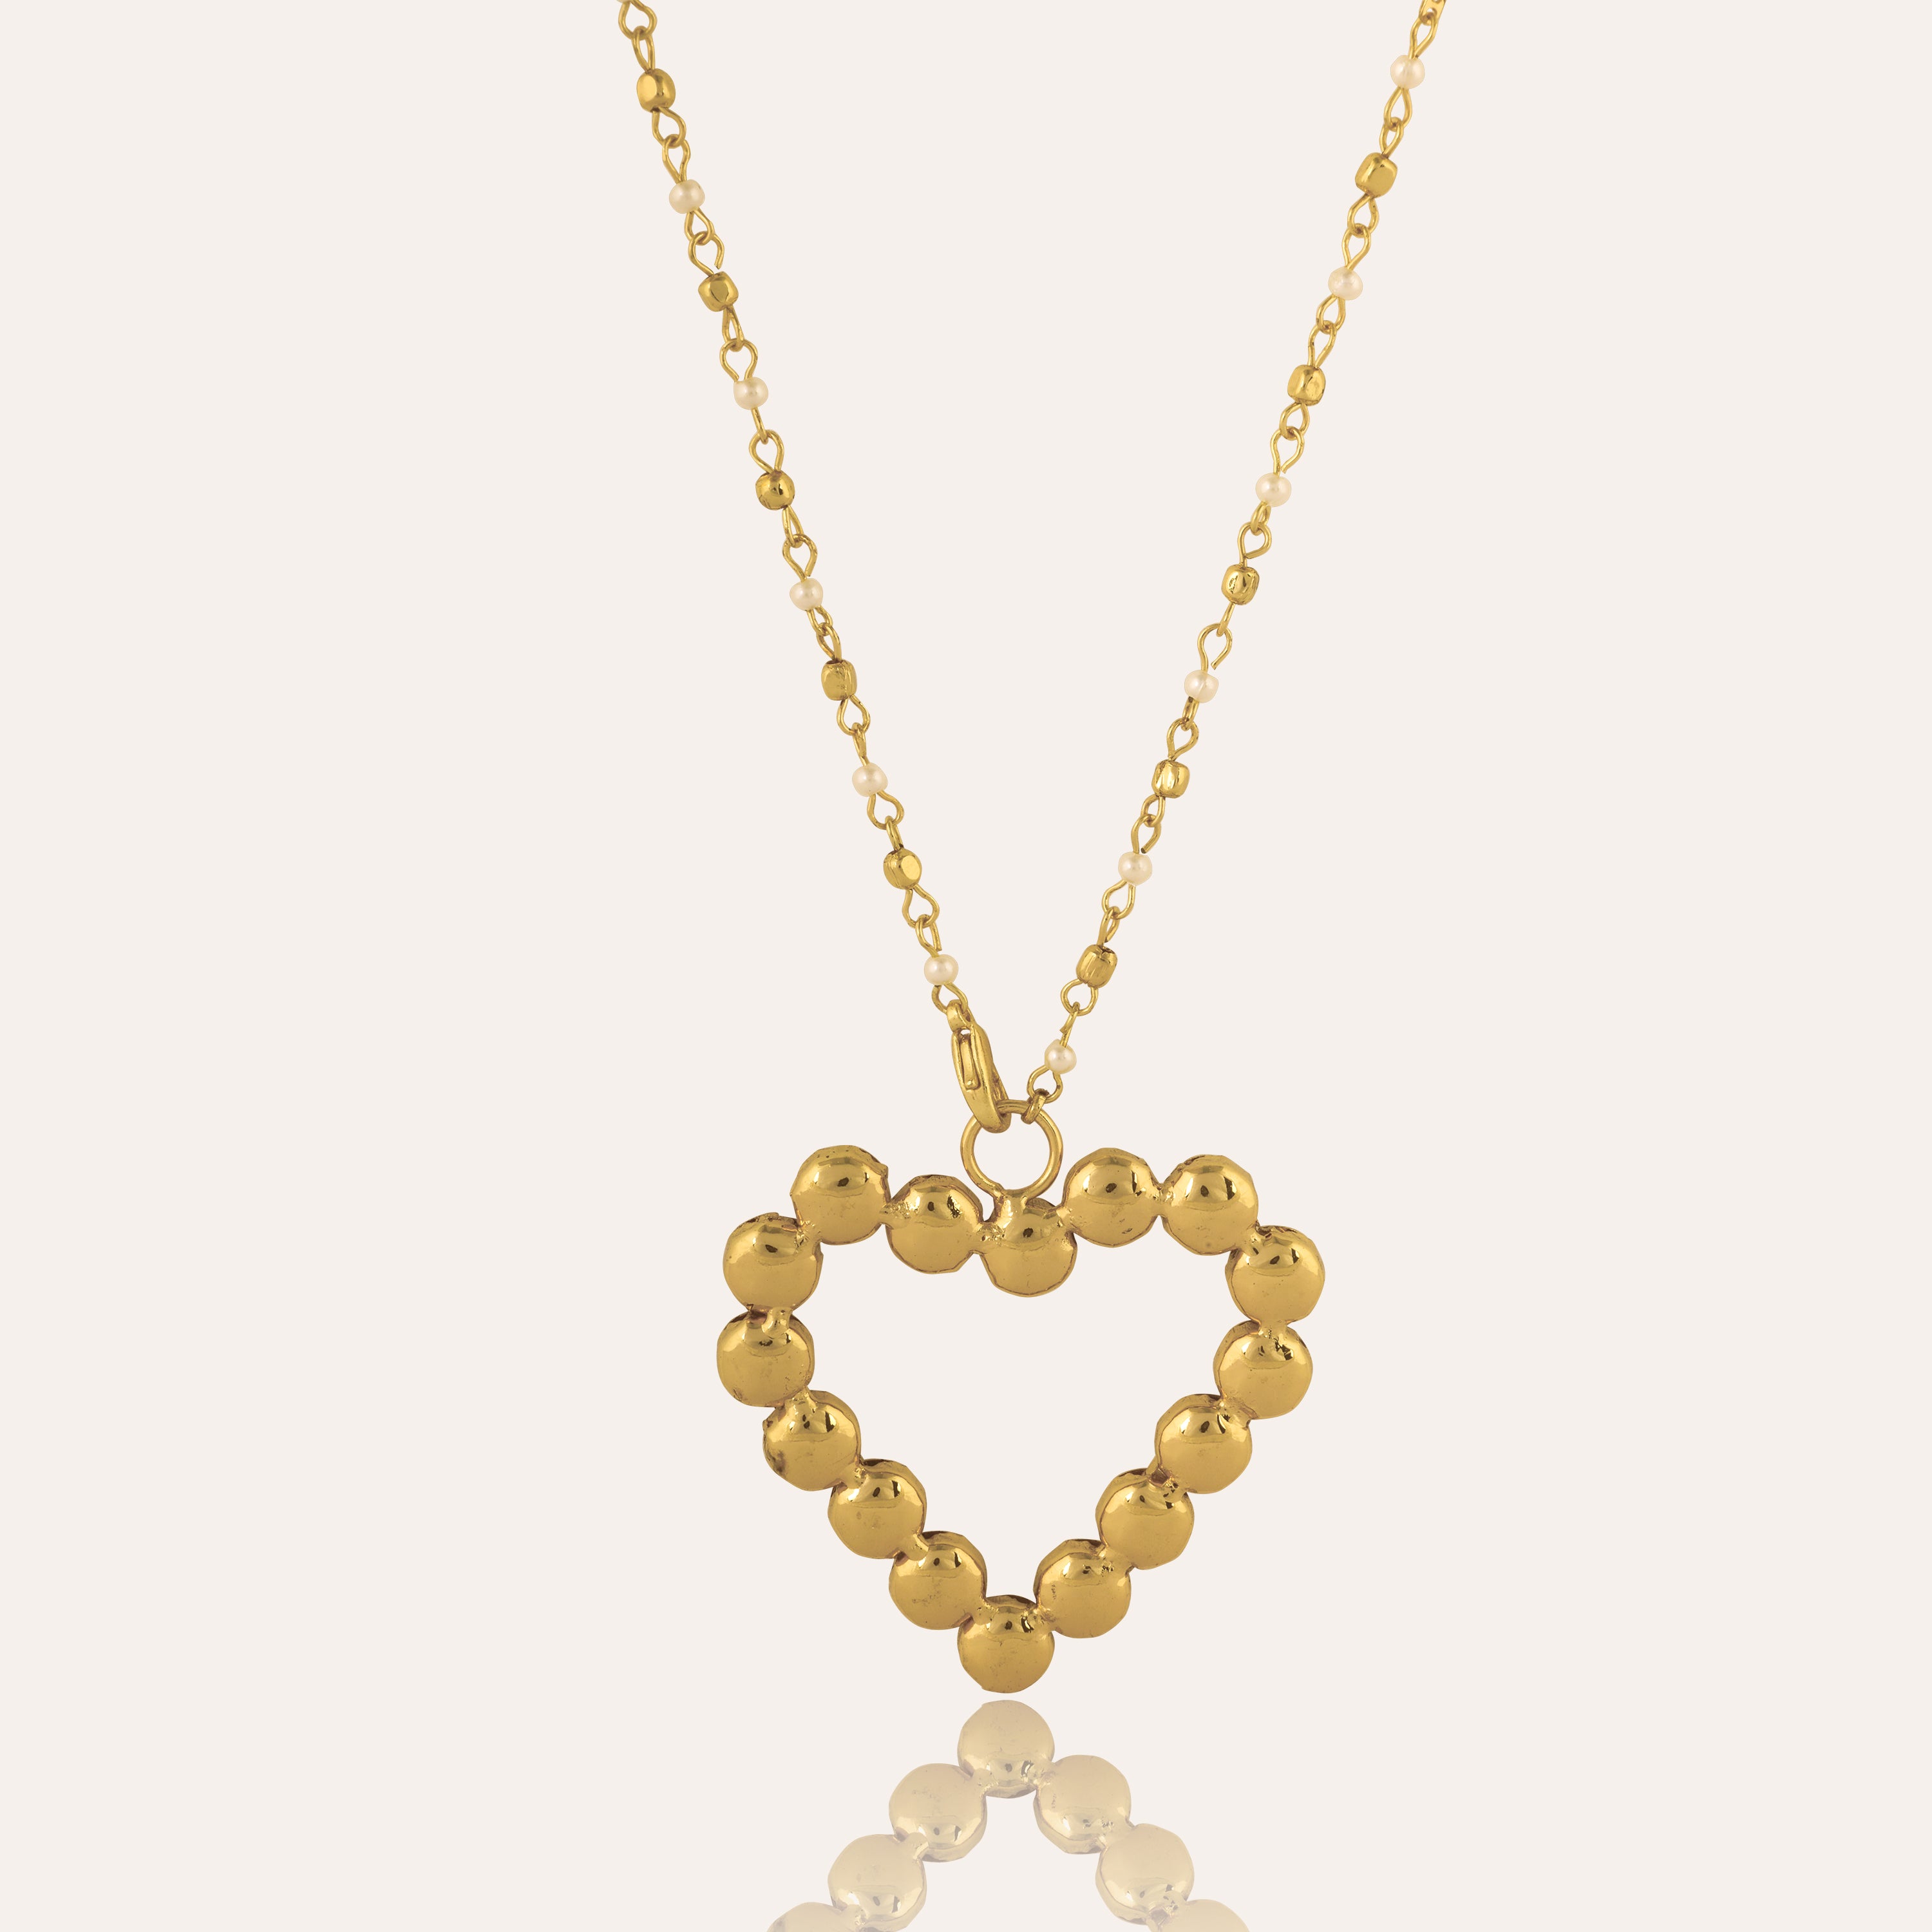 TFC Love Gold Plated Pendant Necklace-Enhance your elegance with our collection of gold-plated necklaces for women. Choose from stunning pendant necklaces, chic choker necklaces, and trendy layered necklaces. Our sleek and dainty designs are both affordable and anti-tarnish, ensuring lasting beauty. Enjoy the cheapest fashion jewellery, lightweight and stylish- only at The Fun Company